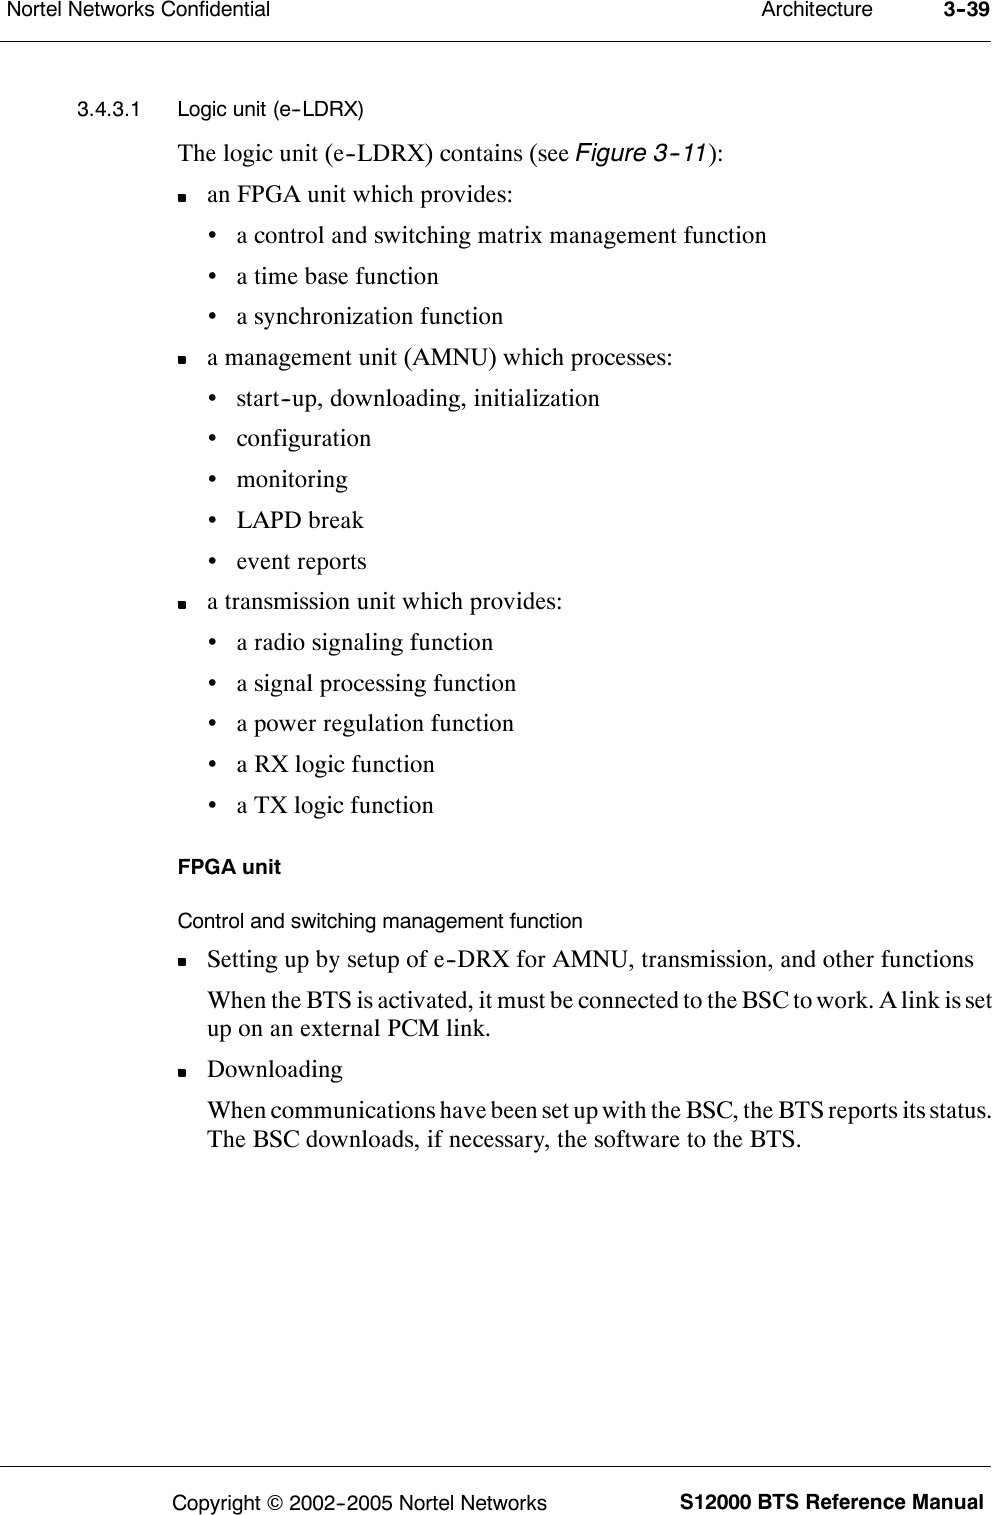 ArchitectureNortel Networks Confidential 3--39S12000 BTS Reference ManualCopyright ©2002--2005 Nortel Networks3.4.3.1 Logic unit (e--LDRX)The logic unit (e--LDRX) contains (see Figure 3--11):an FPGA unit which provides:•a control and switching matrix management function•a time base function•a synchronization functiona management unit (AMNU) which processes:•start--up, downloading, initialization•configuration•monitoring•LAPD break•event reportsa transmission unit which provides:•a radio signaling function•a signal processing function•a power regulation function•a RX logic function•a TX logic functionFPGA unitControl and switching management functionSetting up by setup of e--DRX for AMNU, transmission, and other functionsWhen the BTS is activated, it must be connected to the BSC to work. A link is setup on an external PCM link.DownloadingWhen communications have been set up with the BSC, the BTS reports its status.The BSC downloads, if necessary, the software to the BTS.